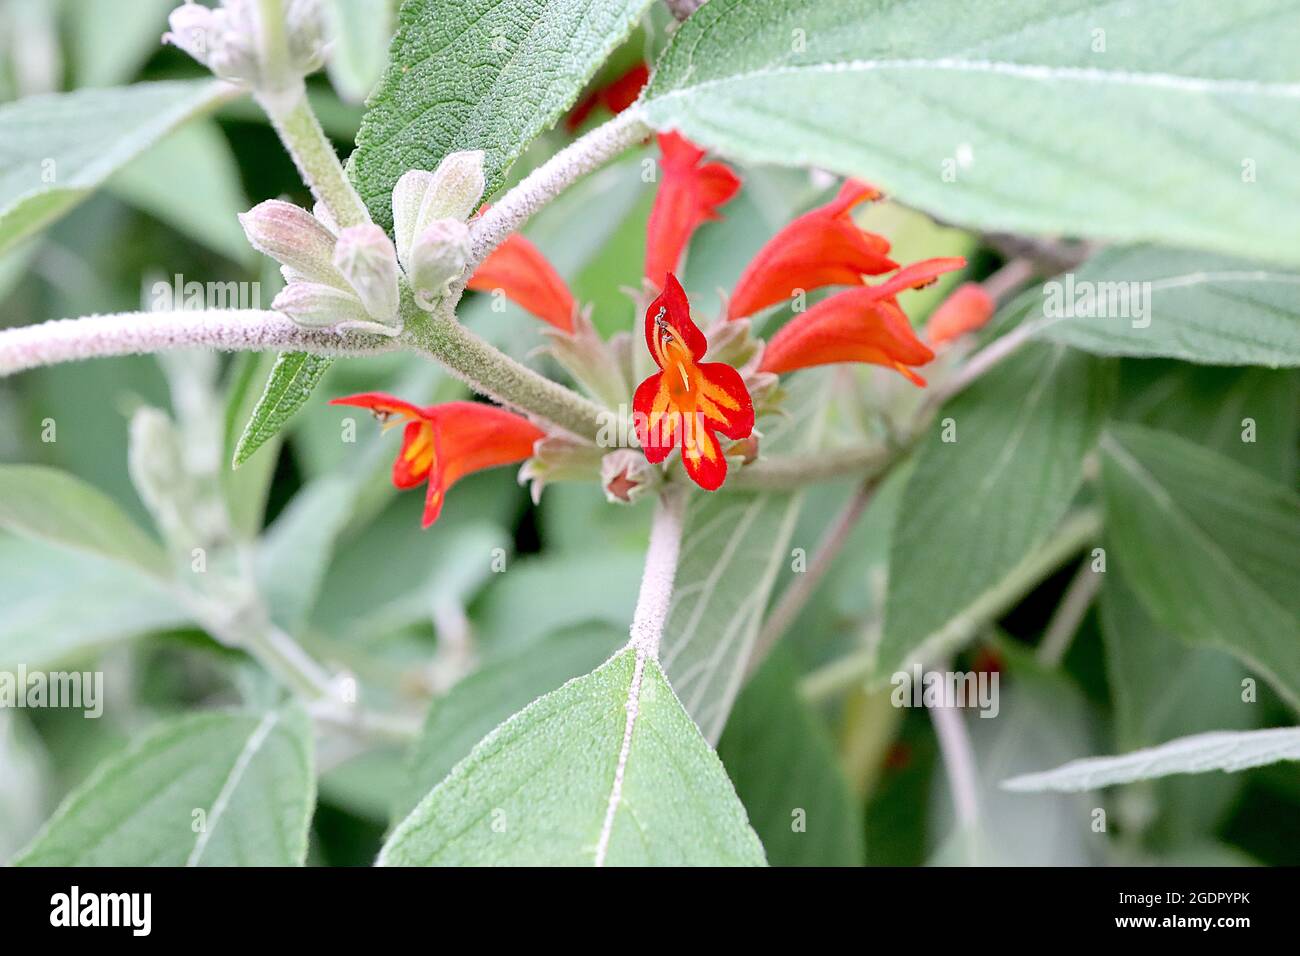 Colquhounia coccinea scarlet-flowered colquhounia – flower whorls of hooded red flowers with yellow flame marks and large lance-shaped leaves,  July, Stock Photo